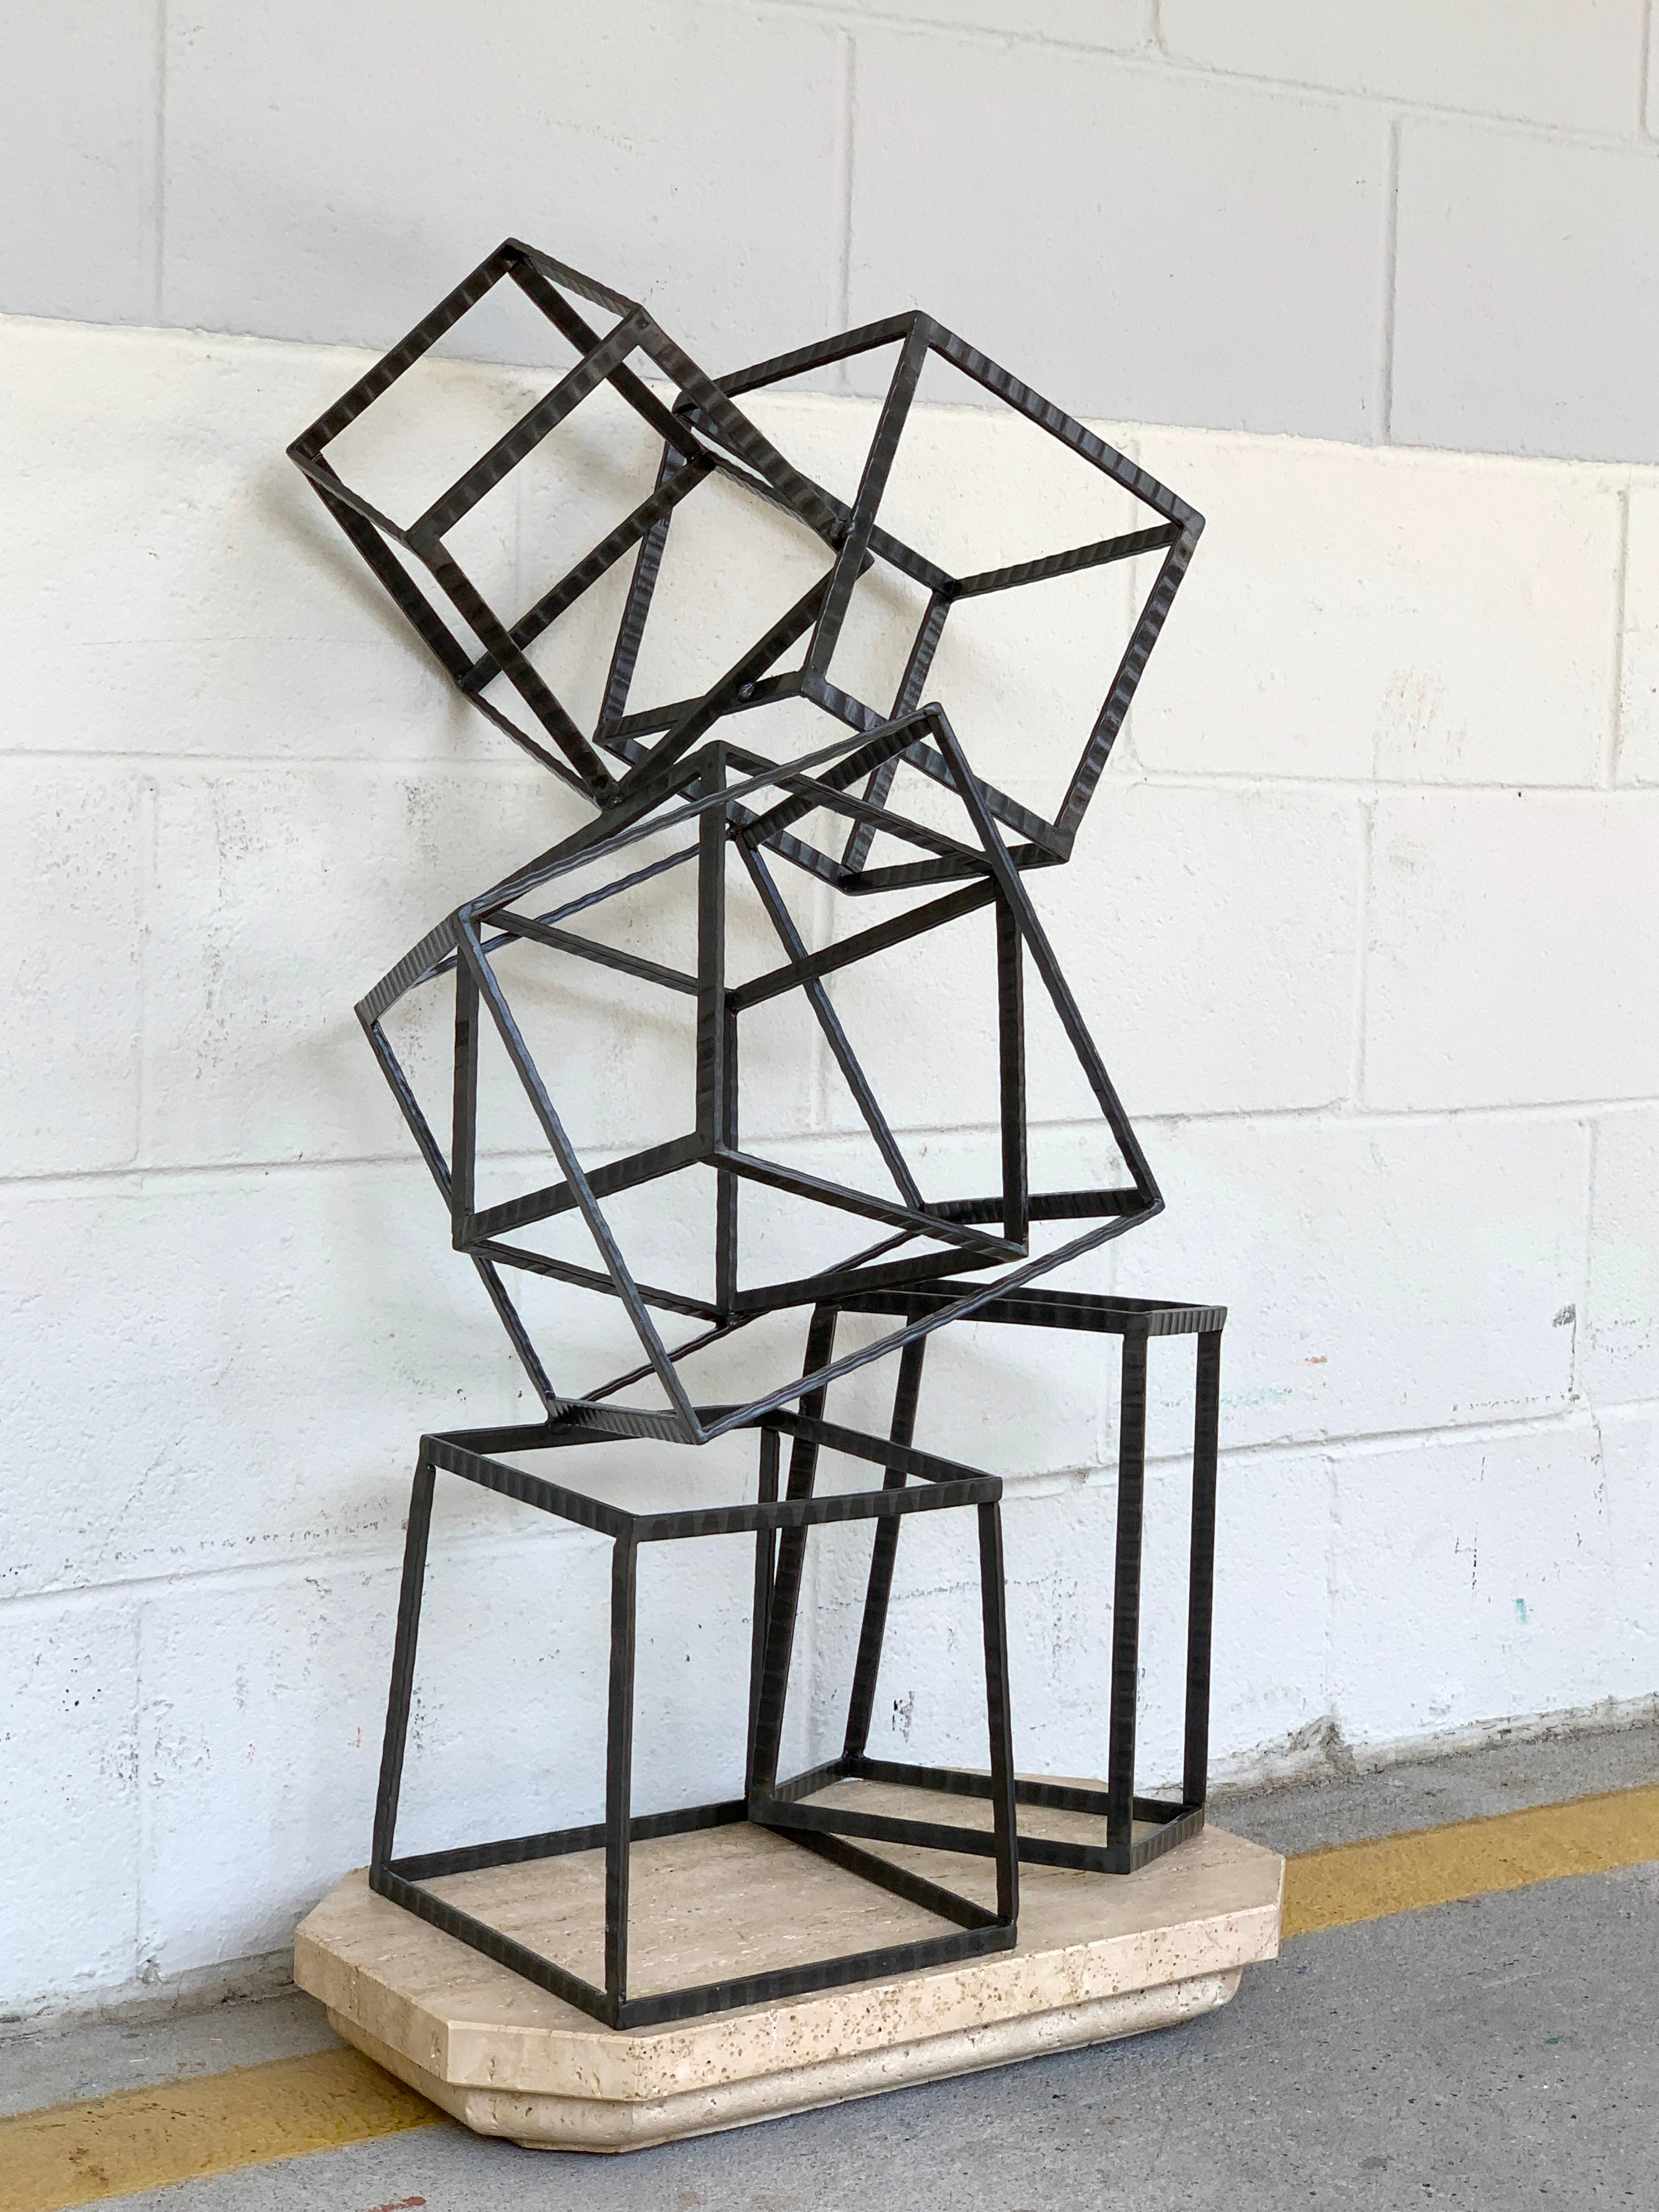 Modern forged iron and travertine quadrilaterals sculpture, with six balancing cubes of varying geometric shapes, raised on a conforming travertine base.
Measures: Sculpture alone 14